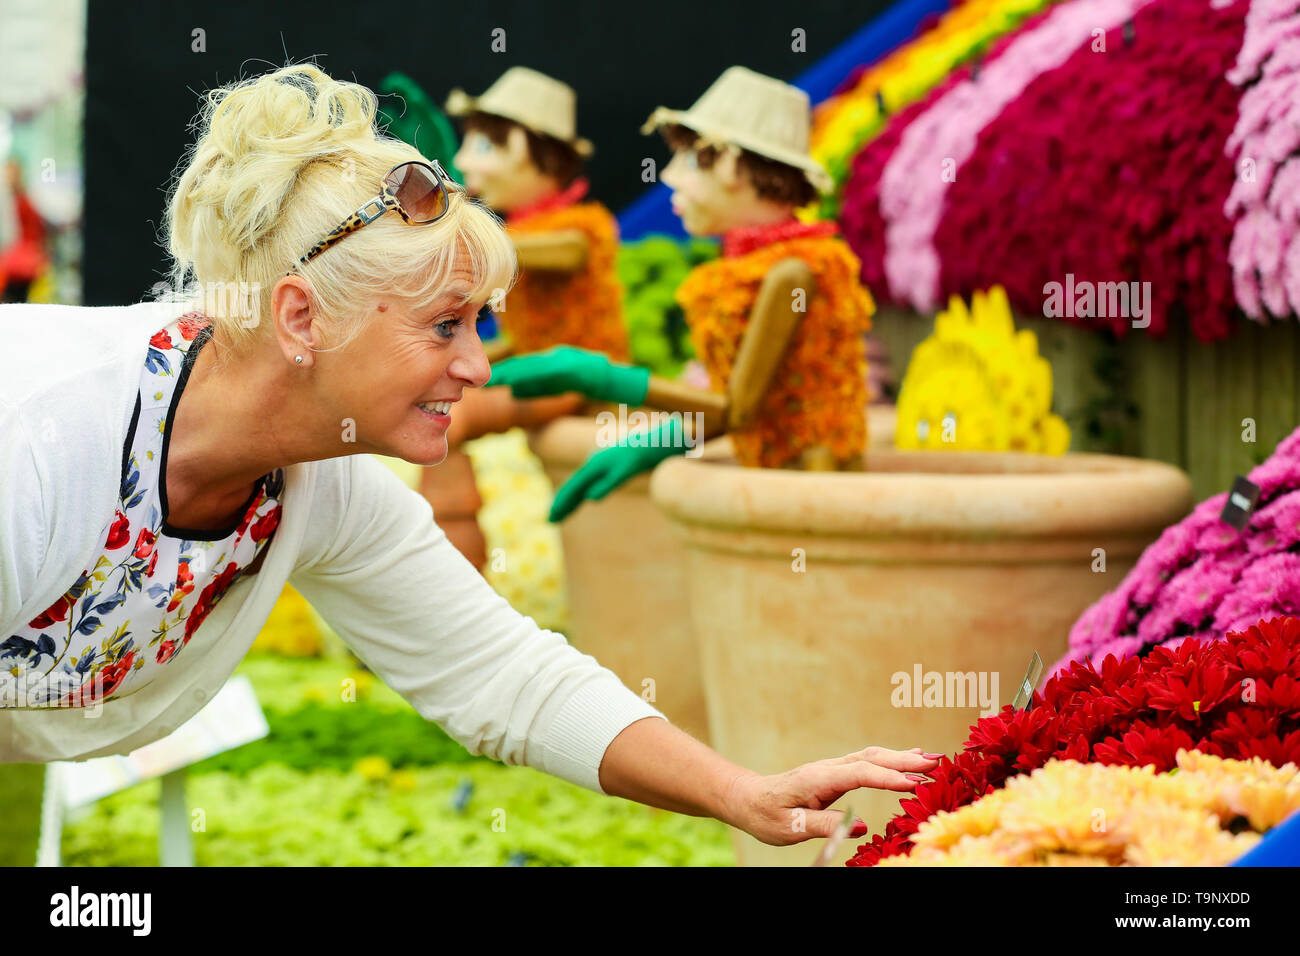 Royal Hospital Chelsea. West London, UK. 20th May, 2019. A woman puts finishing touches to Bill and Ben - the Flower Pot Men. The Royal Horticultural Society Chelsea Flower Show is an annual garden show held over five days in the grounds of the Royal Hospital Chelsea in West London. The show is open to the public from 21 May until 25 May 2019. Credit: Dinendra Haria/Alamy Live News Stock Photo